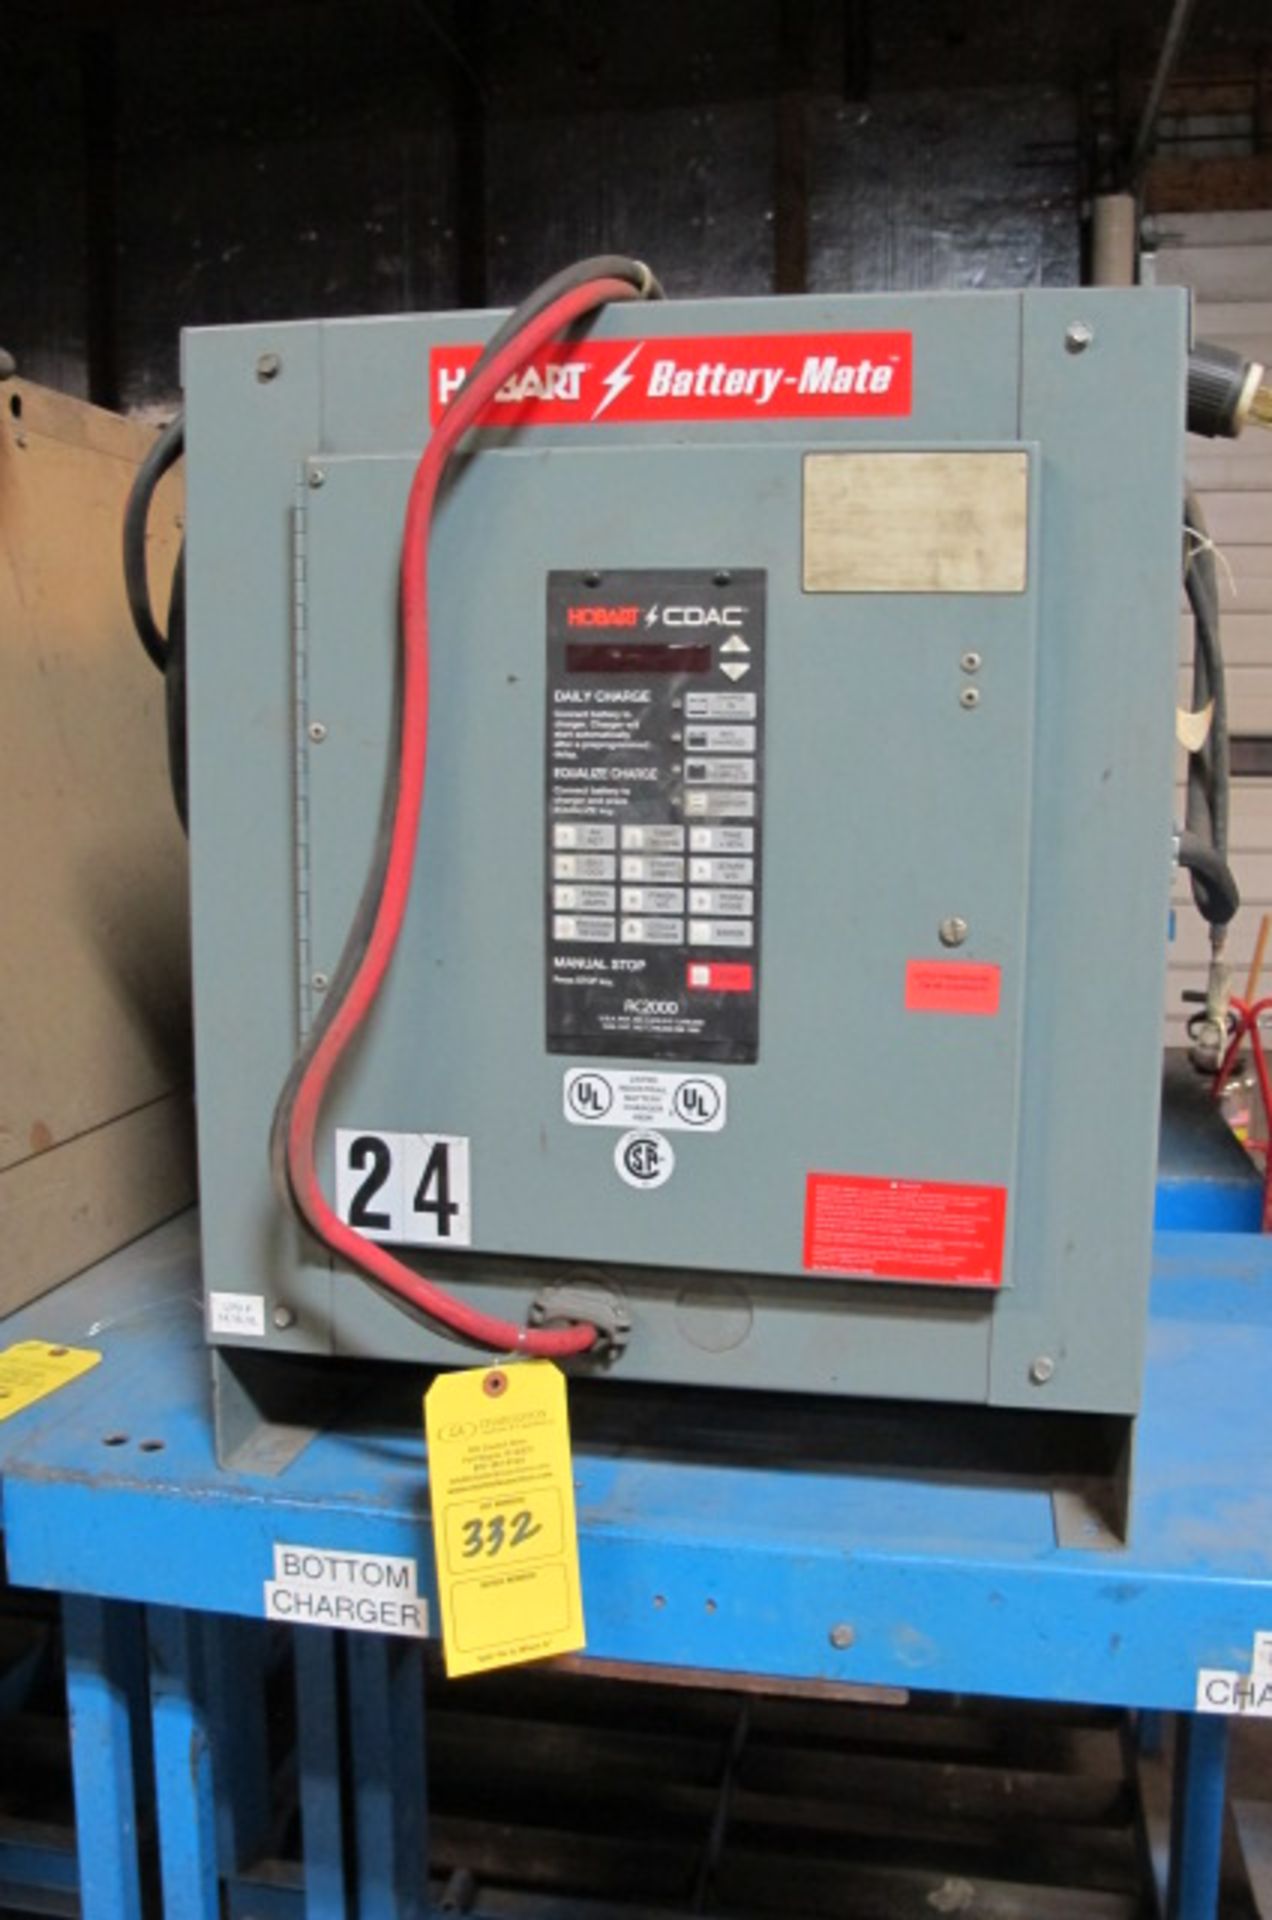 HOBART BATTERY MATE 36V 7680 OH 120, Lyons, Ohio 43523 - all Gaylord plastic pallets are NOT